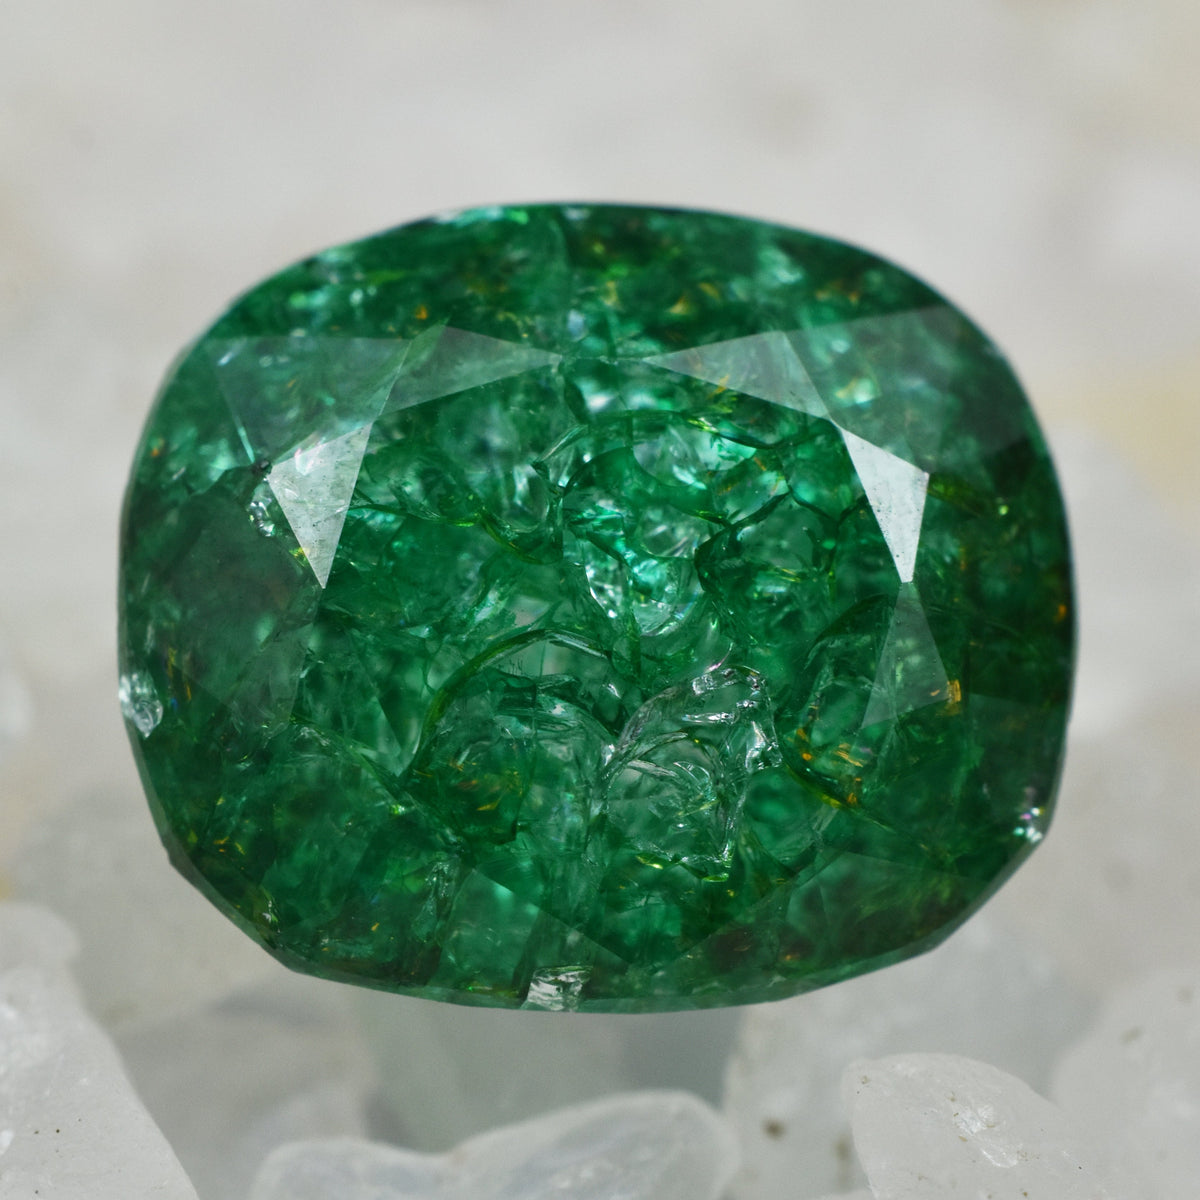 Exclusive Offer !!! Cushion Cut Emerald Green Natural CERTIFIED Loose Gemstone 10.52 Carat Ring Size | Best For Engagement Rings | Free Delivery Free Gift